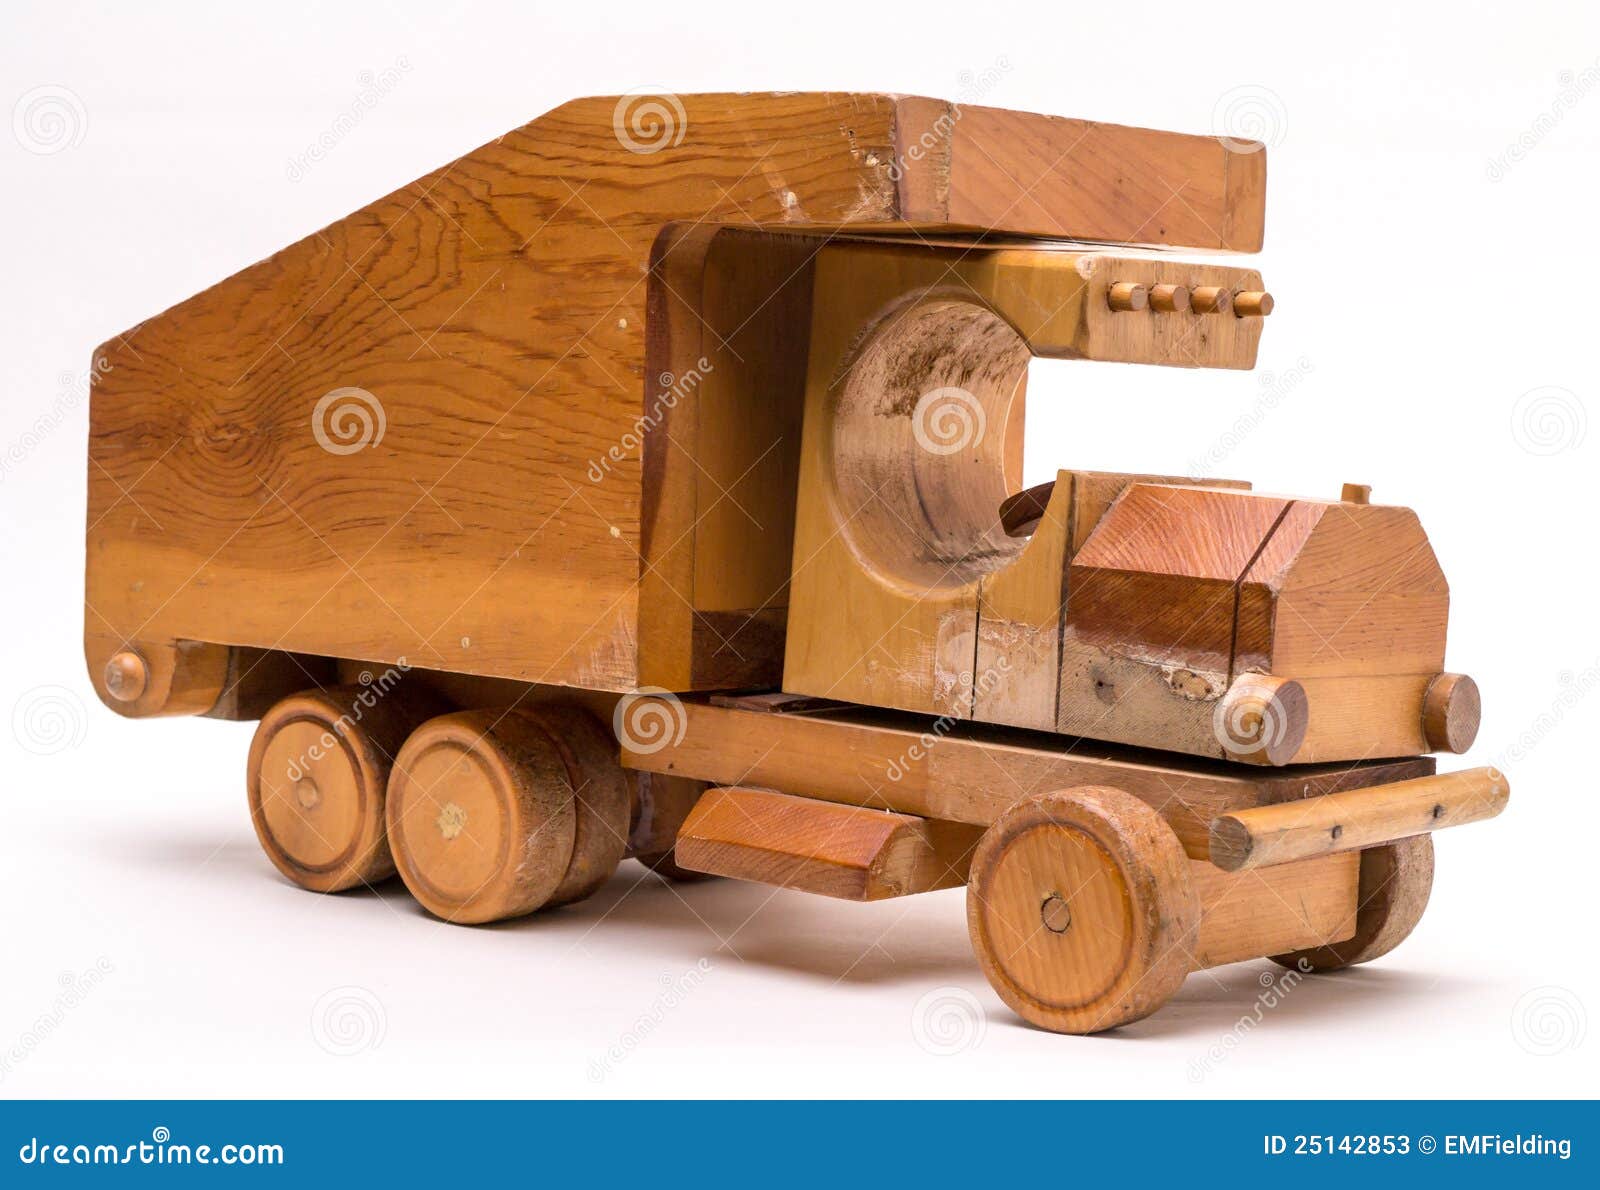 Wooden Toy Truck Plans